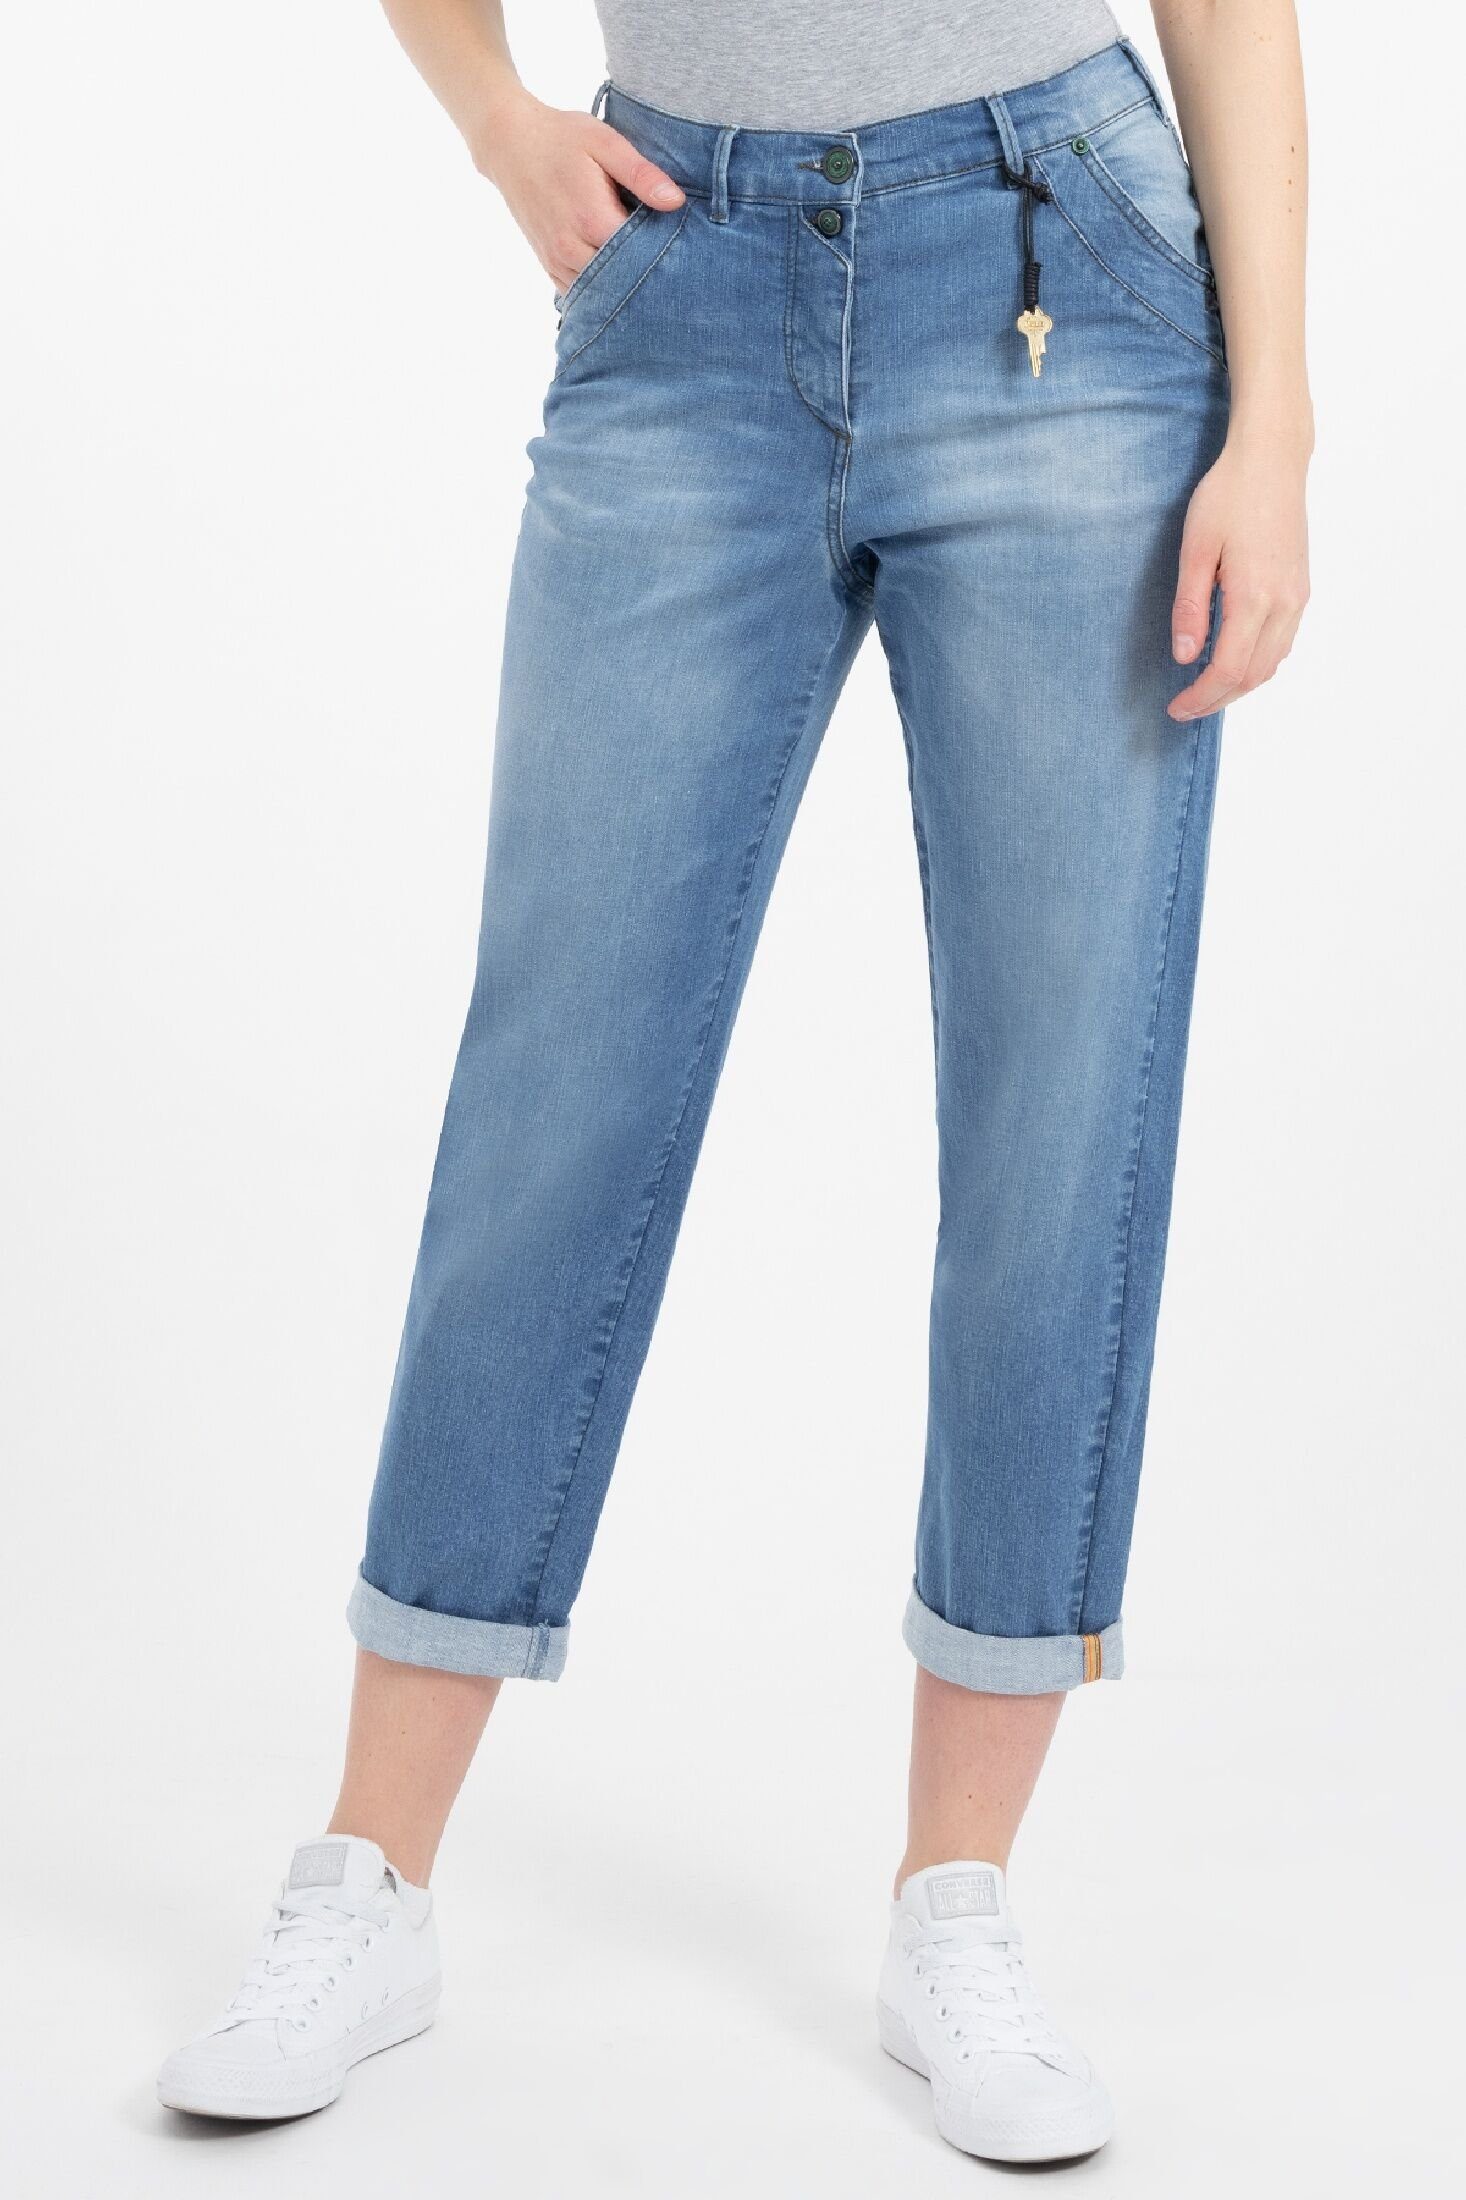 Recover Pants Relax-fit-Jeans ALLEGRA DENIM-BLUE